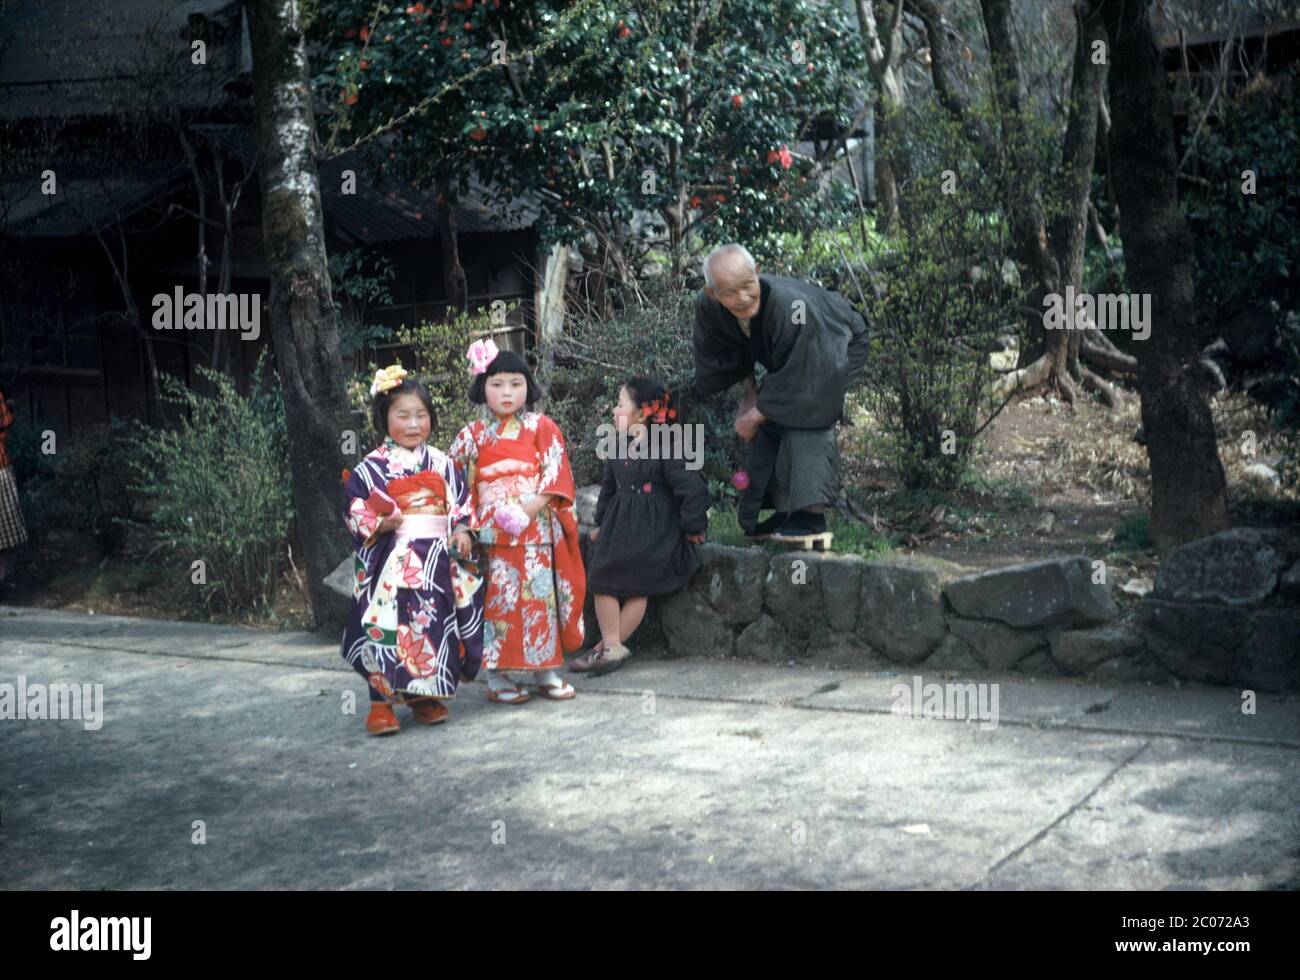 [ 1940s Japan - Shichi-Go-San ] — Three young girls and an elderly man, April 1949 (Showa 24).  Two of the girls are all dressed up in kimono and beautiful hair decorations, so they are likely celebrating Shichi-Go-San (七五三), a traditional rite of passage for three and seven year old girls and five year old boys.  20th century vintage slide film. Stock Photo